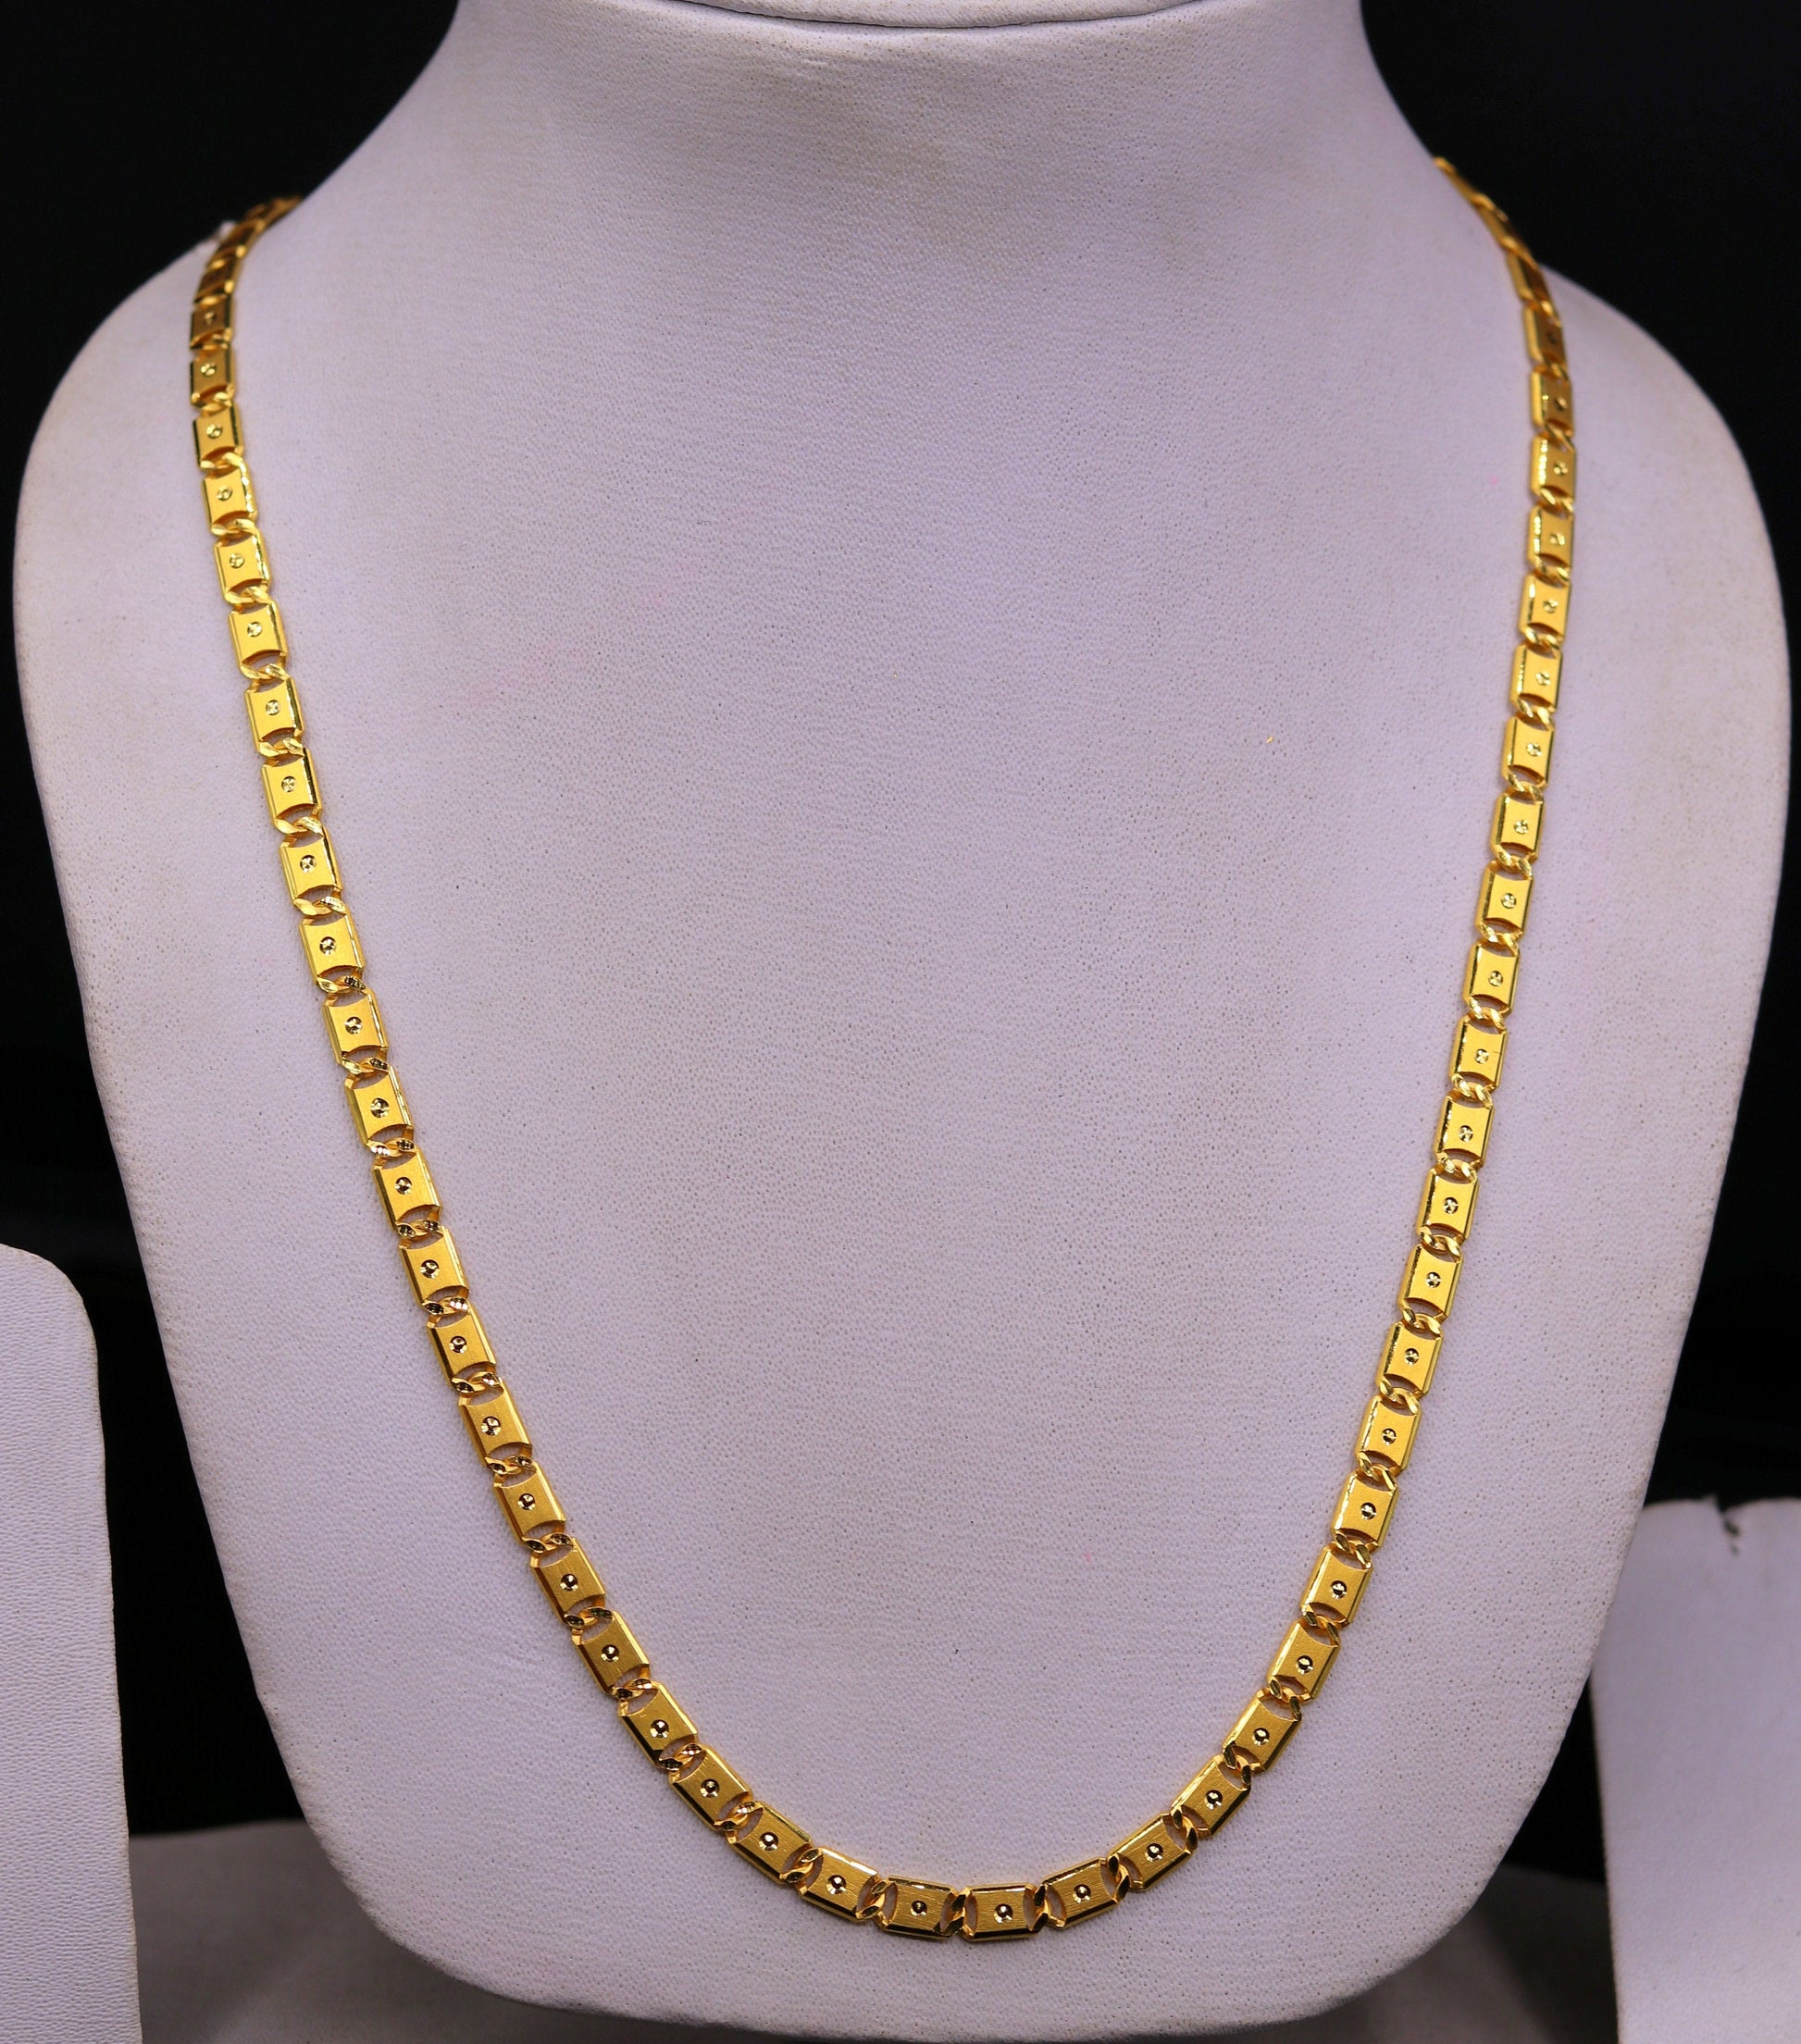 22kt Yellow gold handmade gorgeous Royal Nawabi chain necklace solid diamond cut design unisex bar chain from india - TRIBAL ORNAMENTS